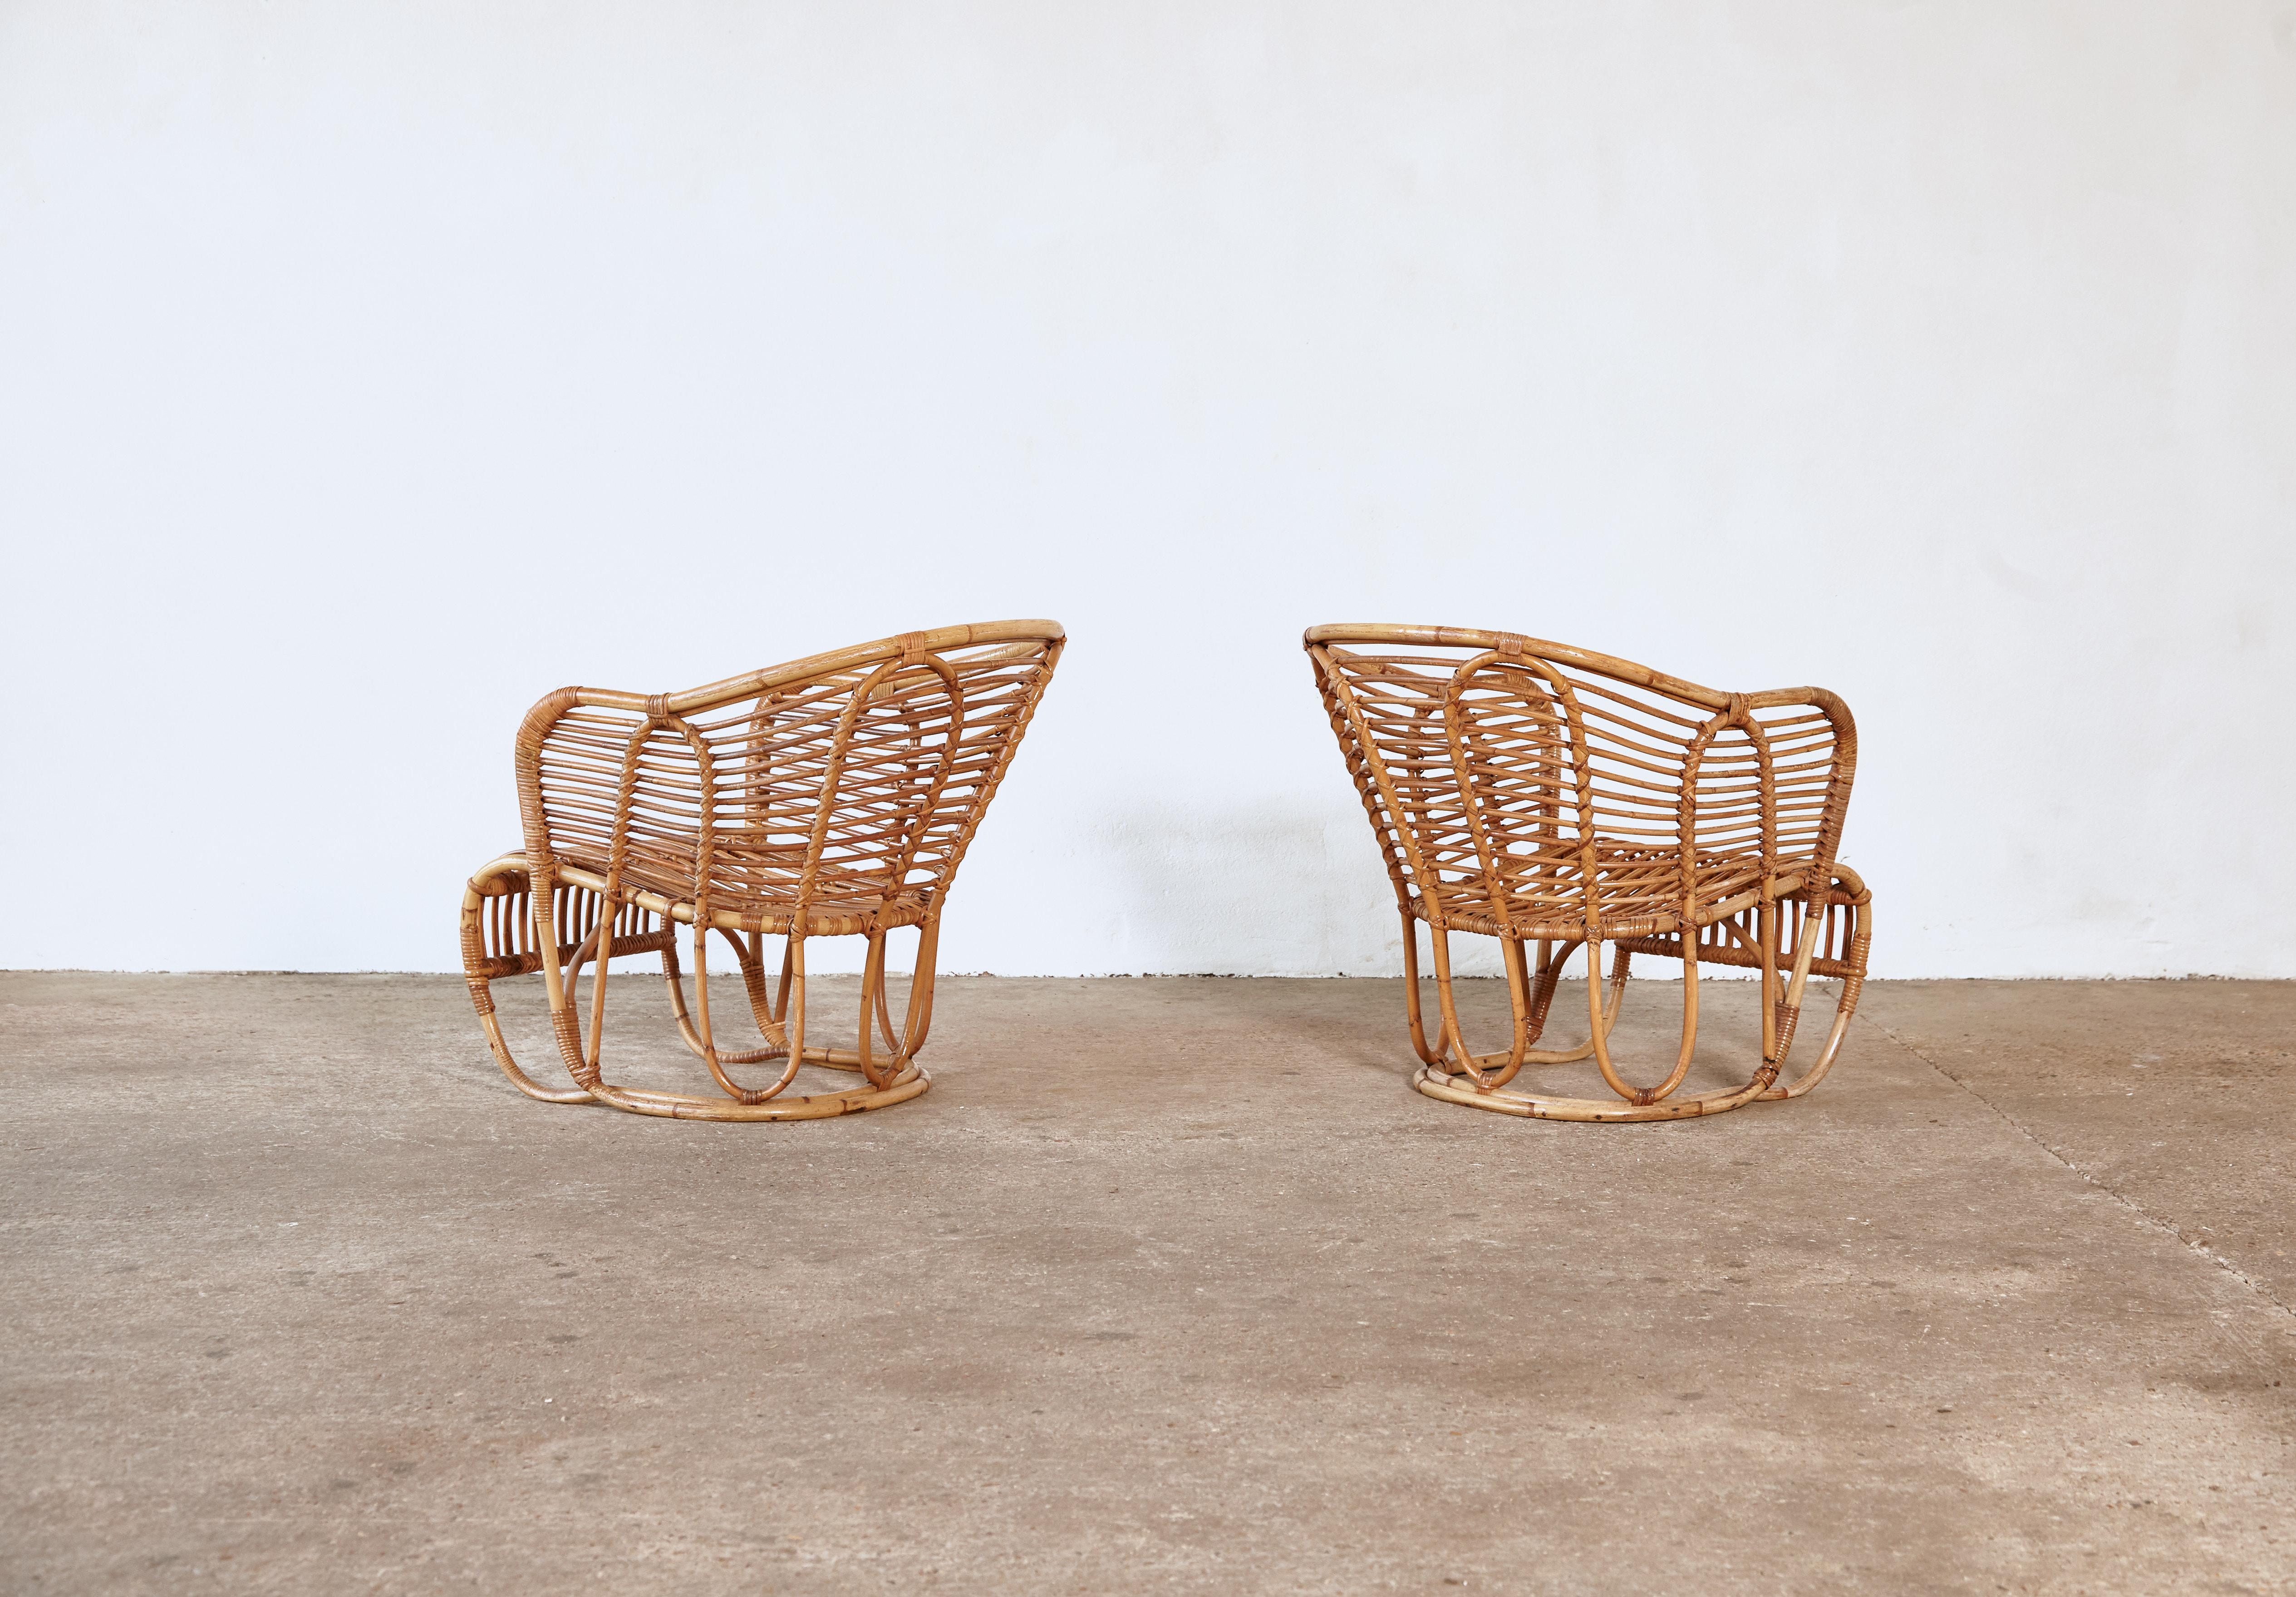 20th Century Pair of Tove & Edvard Kindt-Larsen Bamboo and Cane Chairs, Denmark, 1940s